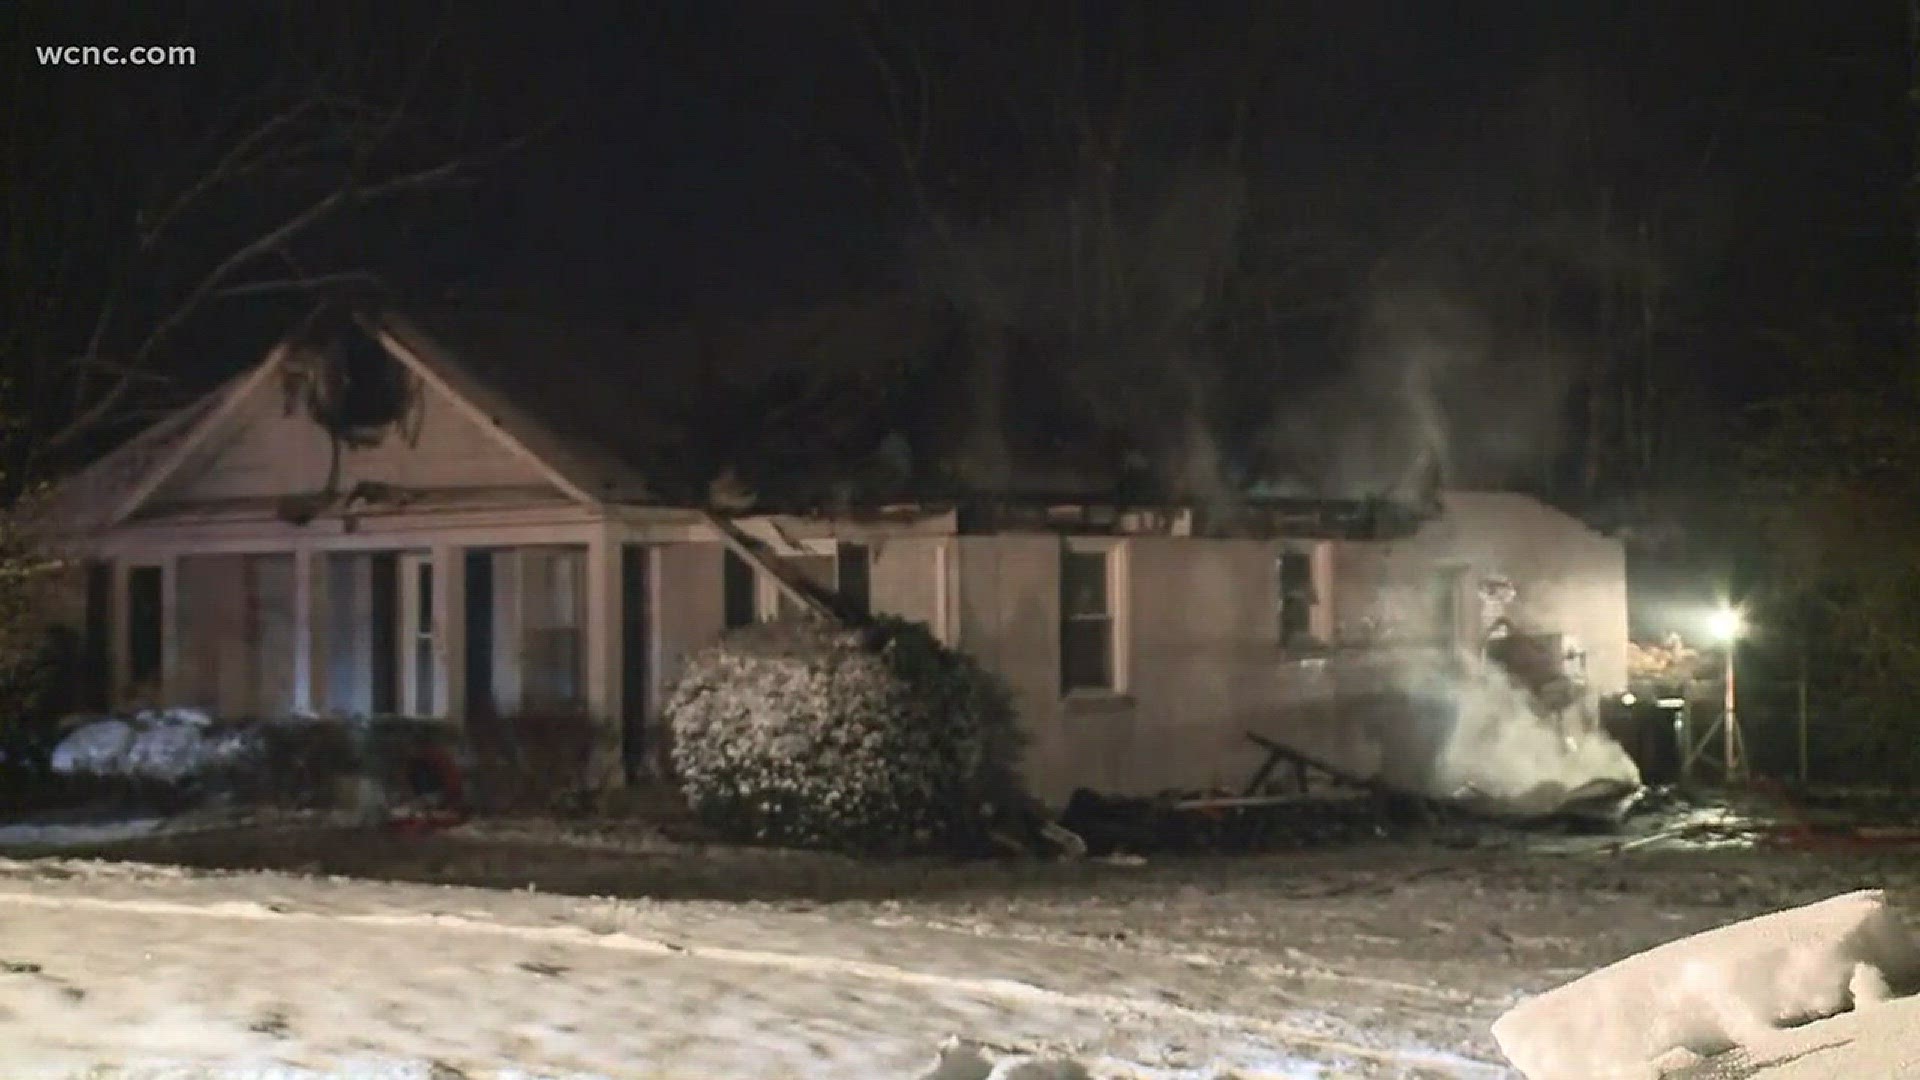 Fire officials are investigating the cause of a house fire in northeast Charlotte Thursday morning.